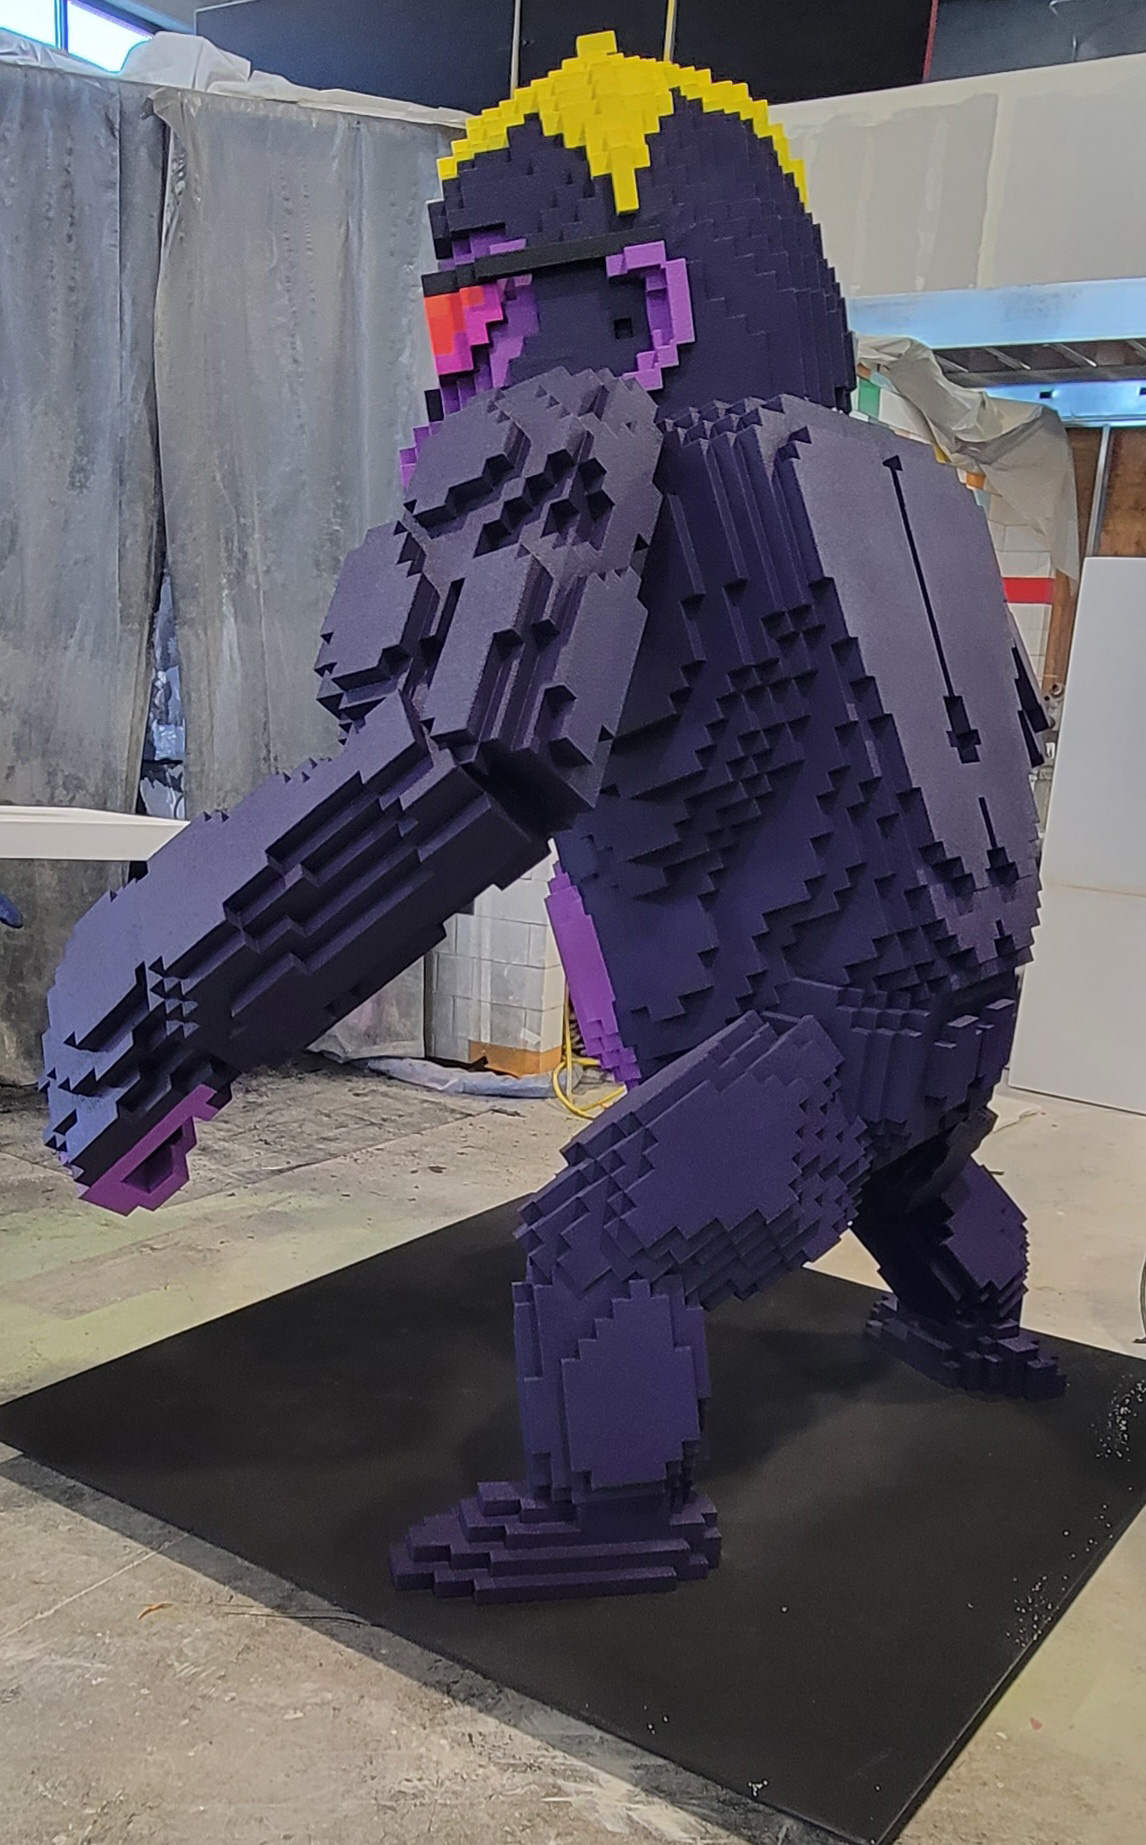 3D printed CyberKongz giant statue in production